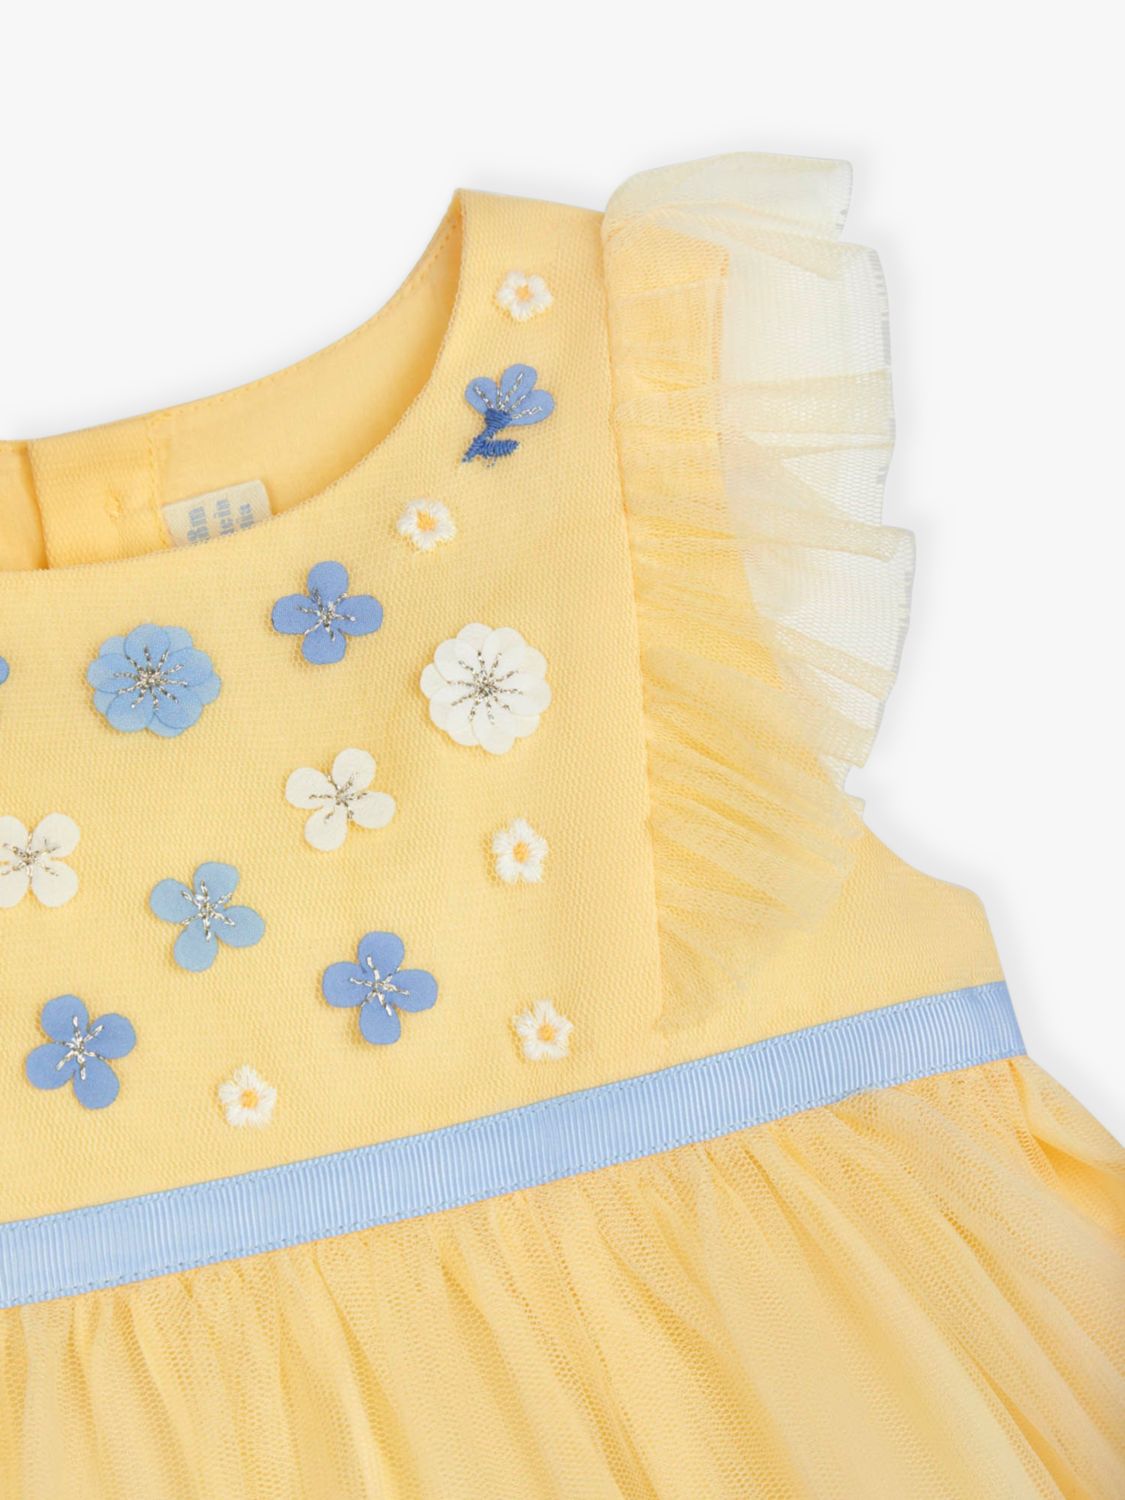 JoJo Maman Bébé Baby Floral Tulle Party Dress, Yellow, 2-3 years